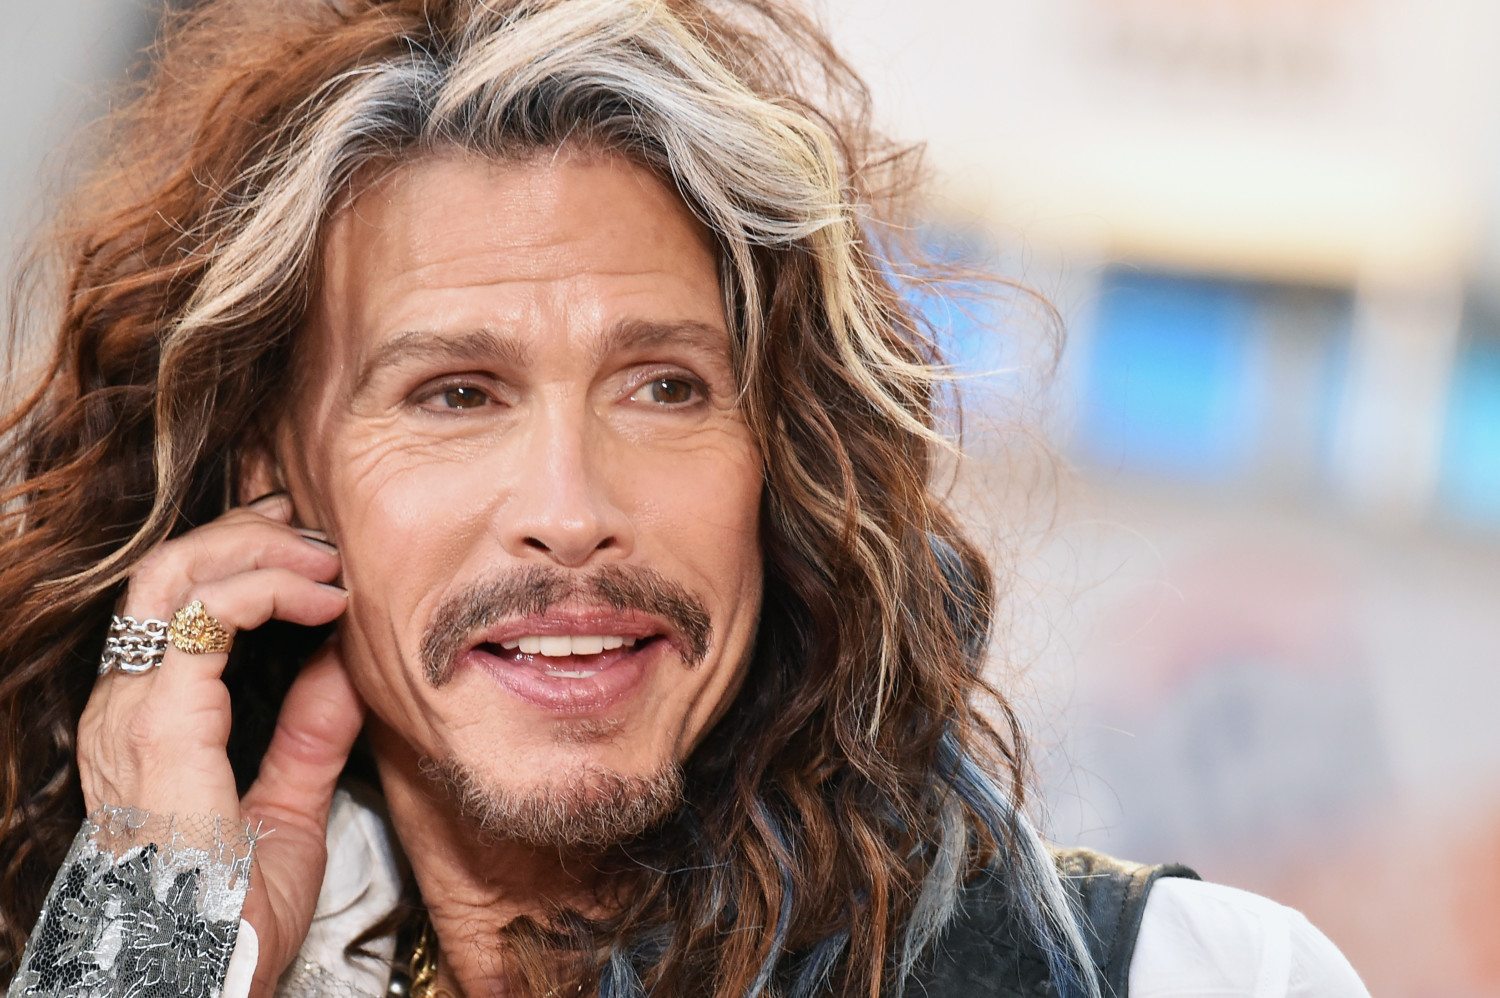 Steven Tyler Performs On NBC's 'Today'